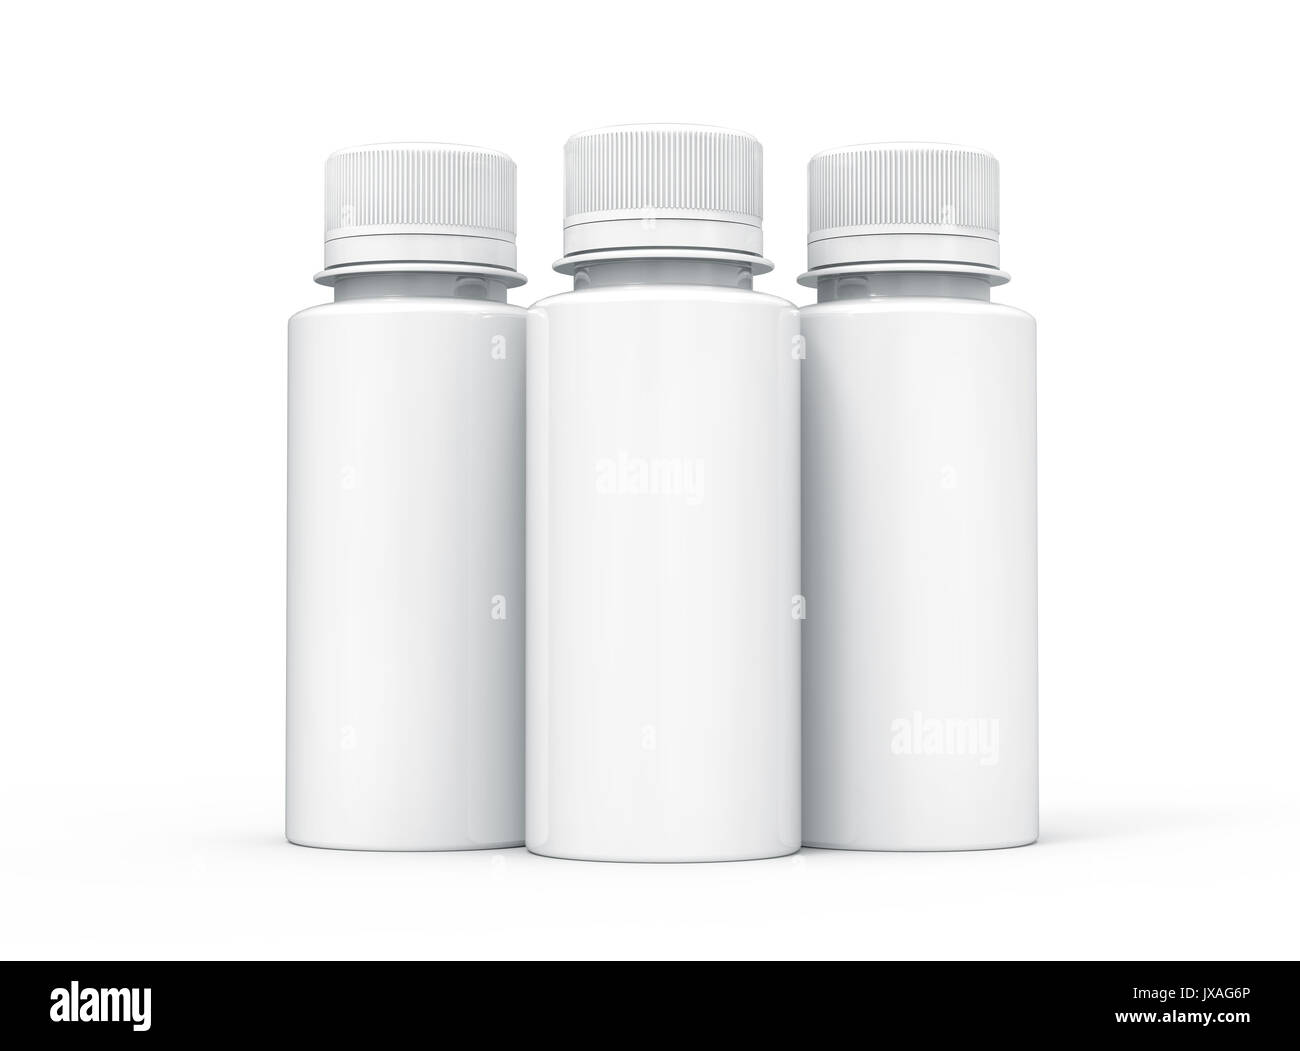 Plastic bottle for drinks, blank bottle mockup template in 3d rendering isolated on white for design uses, three bottles collection Stock Photo